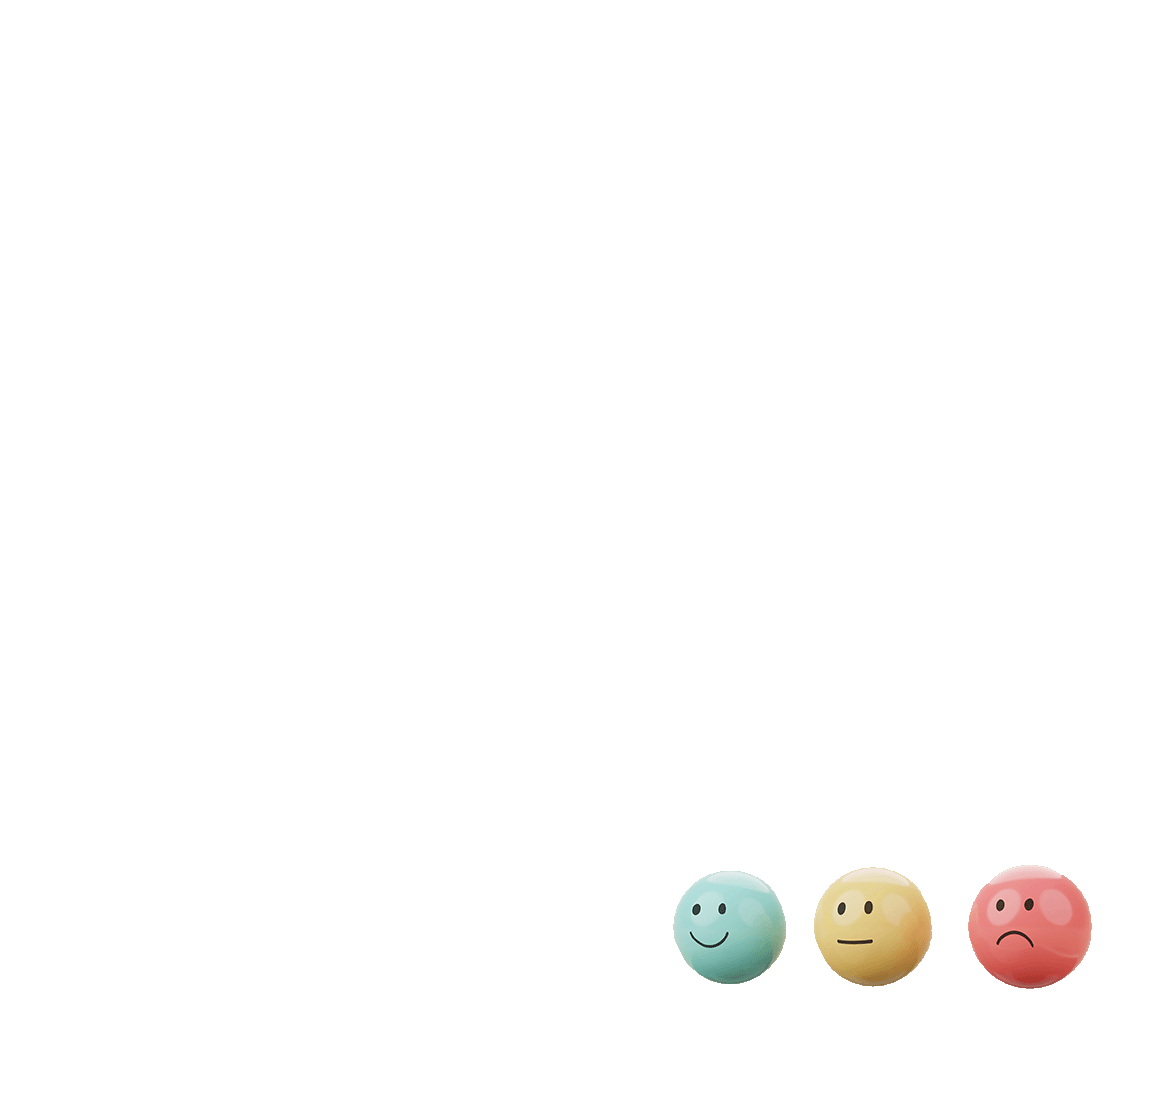 A red sphere with a sad face, a yellow with a neutral face and green sphere with a happy face.